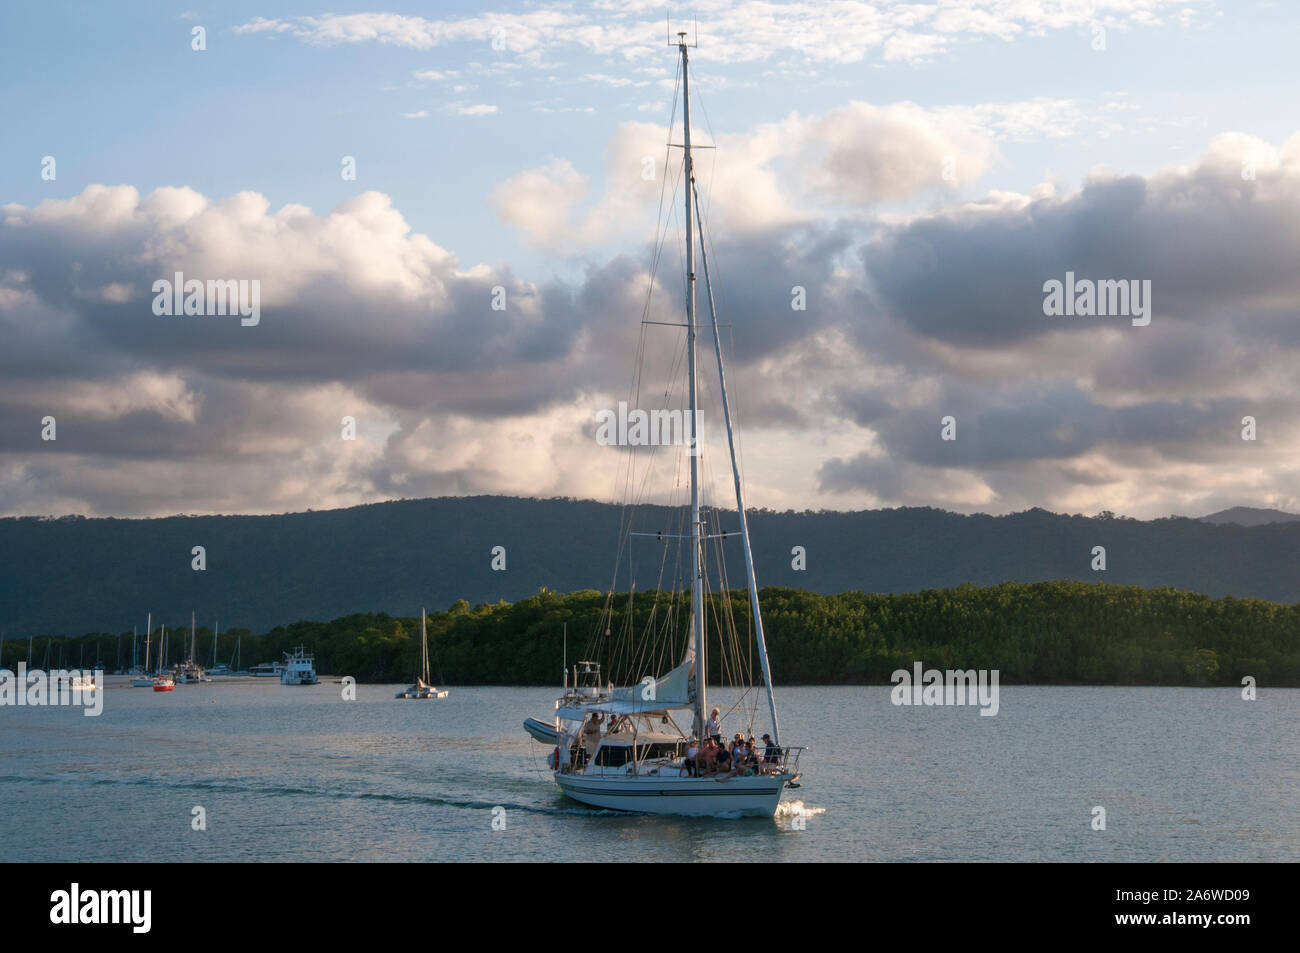 Yacht sailing out of Dickson's Inlet, Port Douglas, an upscale tourist destination in tropical North Queensland, Australia Stock Photo